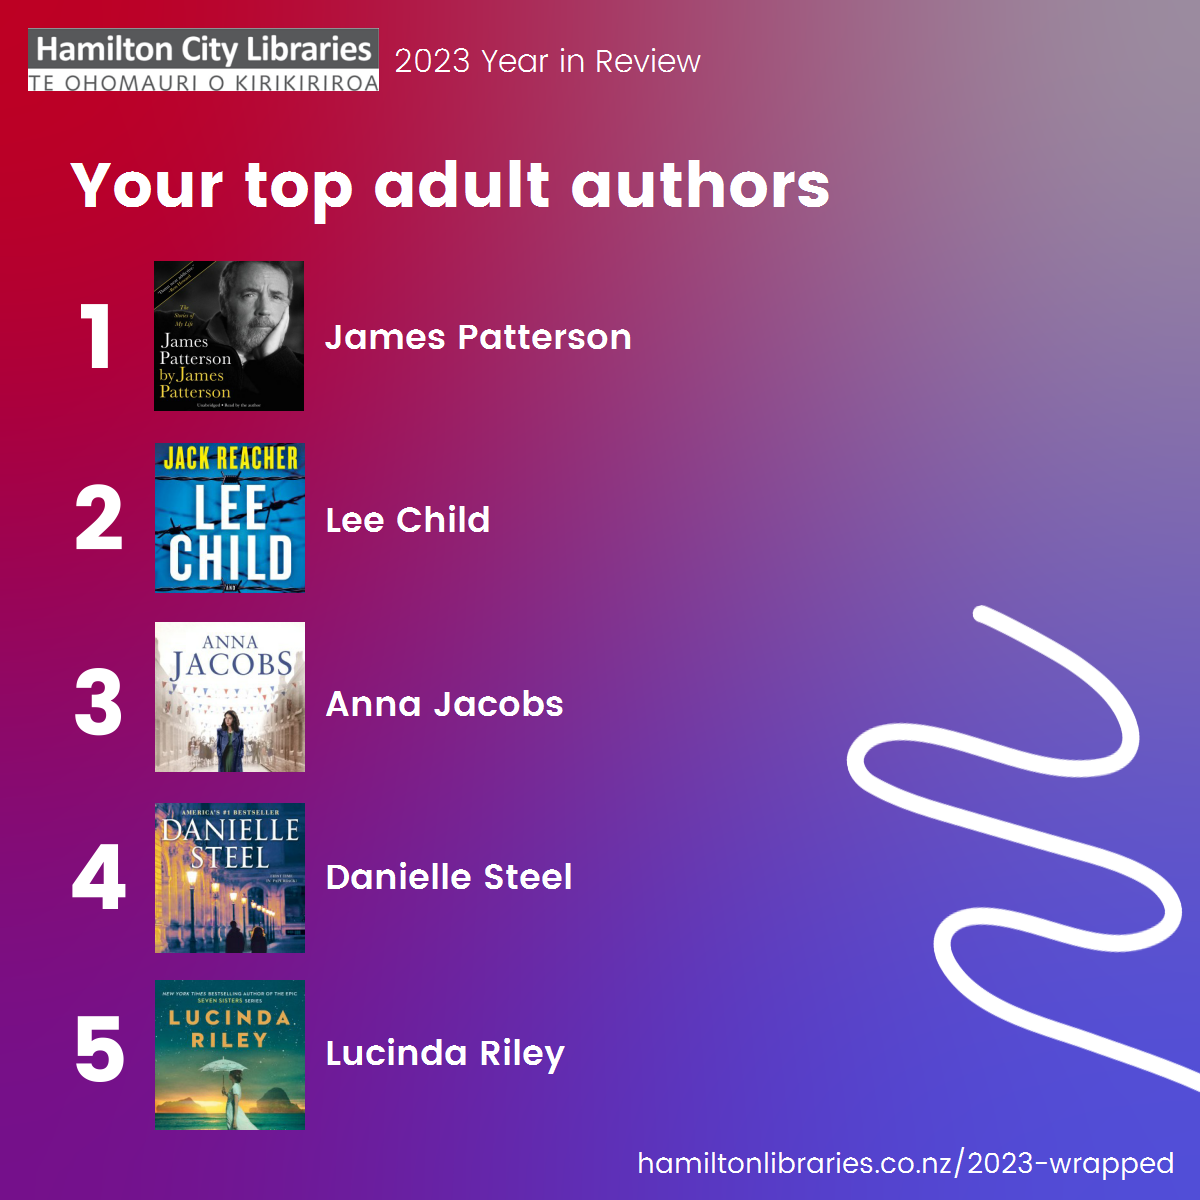 Top 5 Adult Authors: James Patterson, Lee Child, Anna Jacobs, Danielle Steel, Lucinda Riley